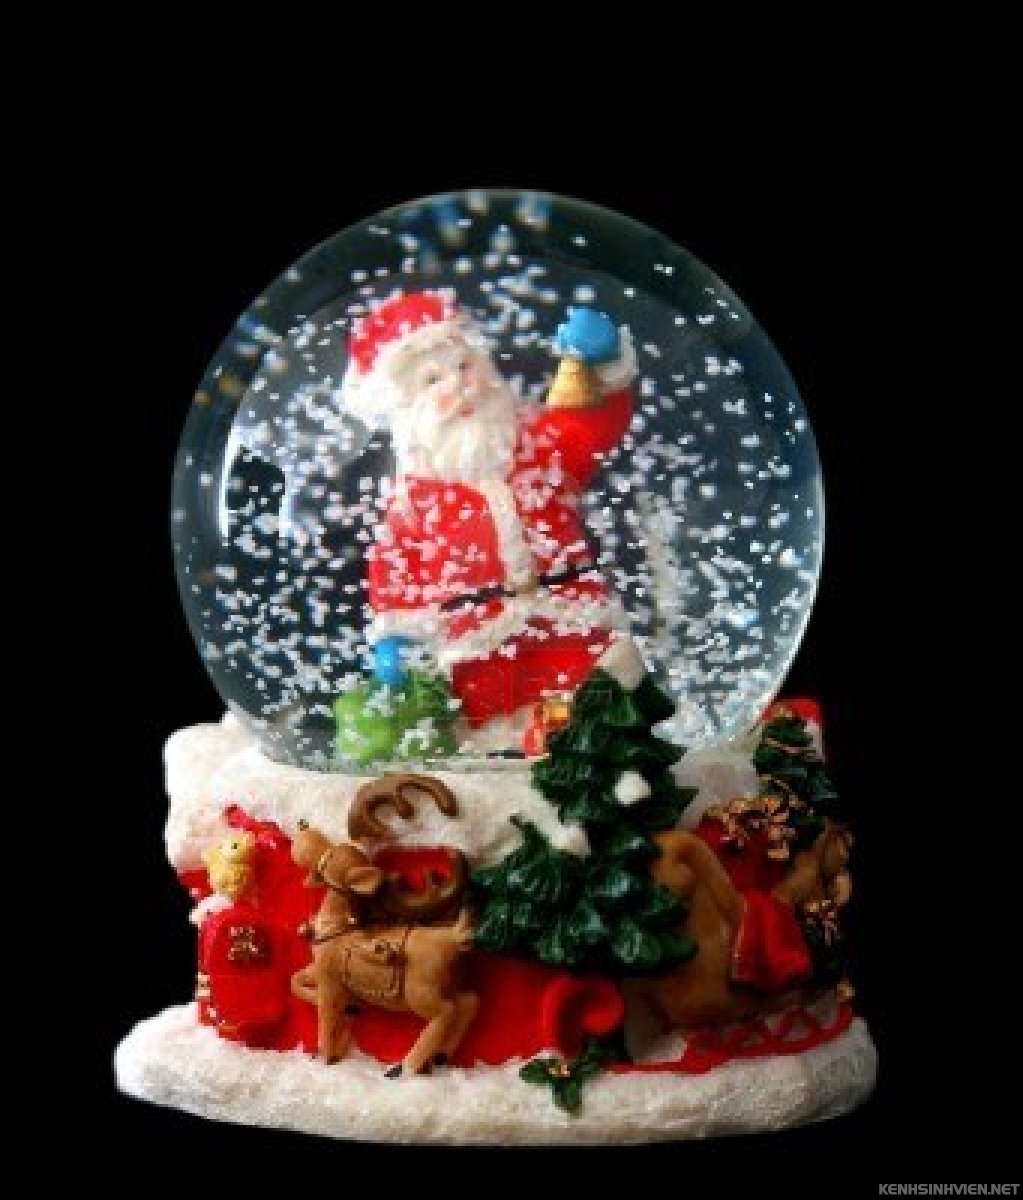 KenhSinhVien-4181217-christmas-glass-ball-with-santa-claus-and-specific-decorations.jpg